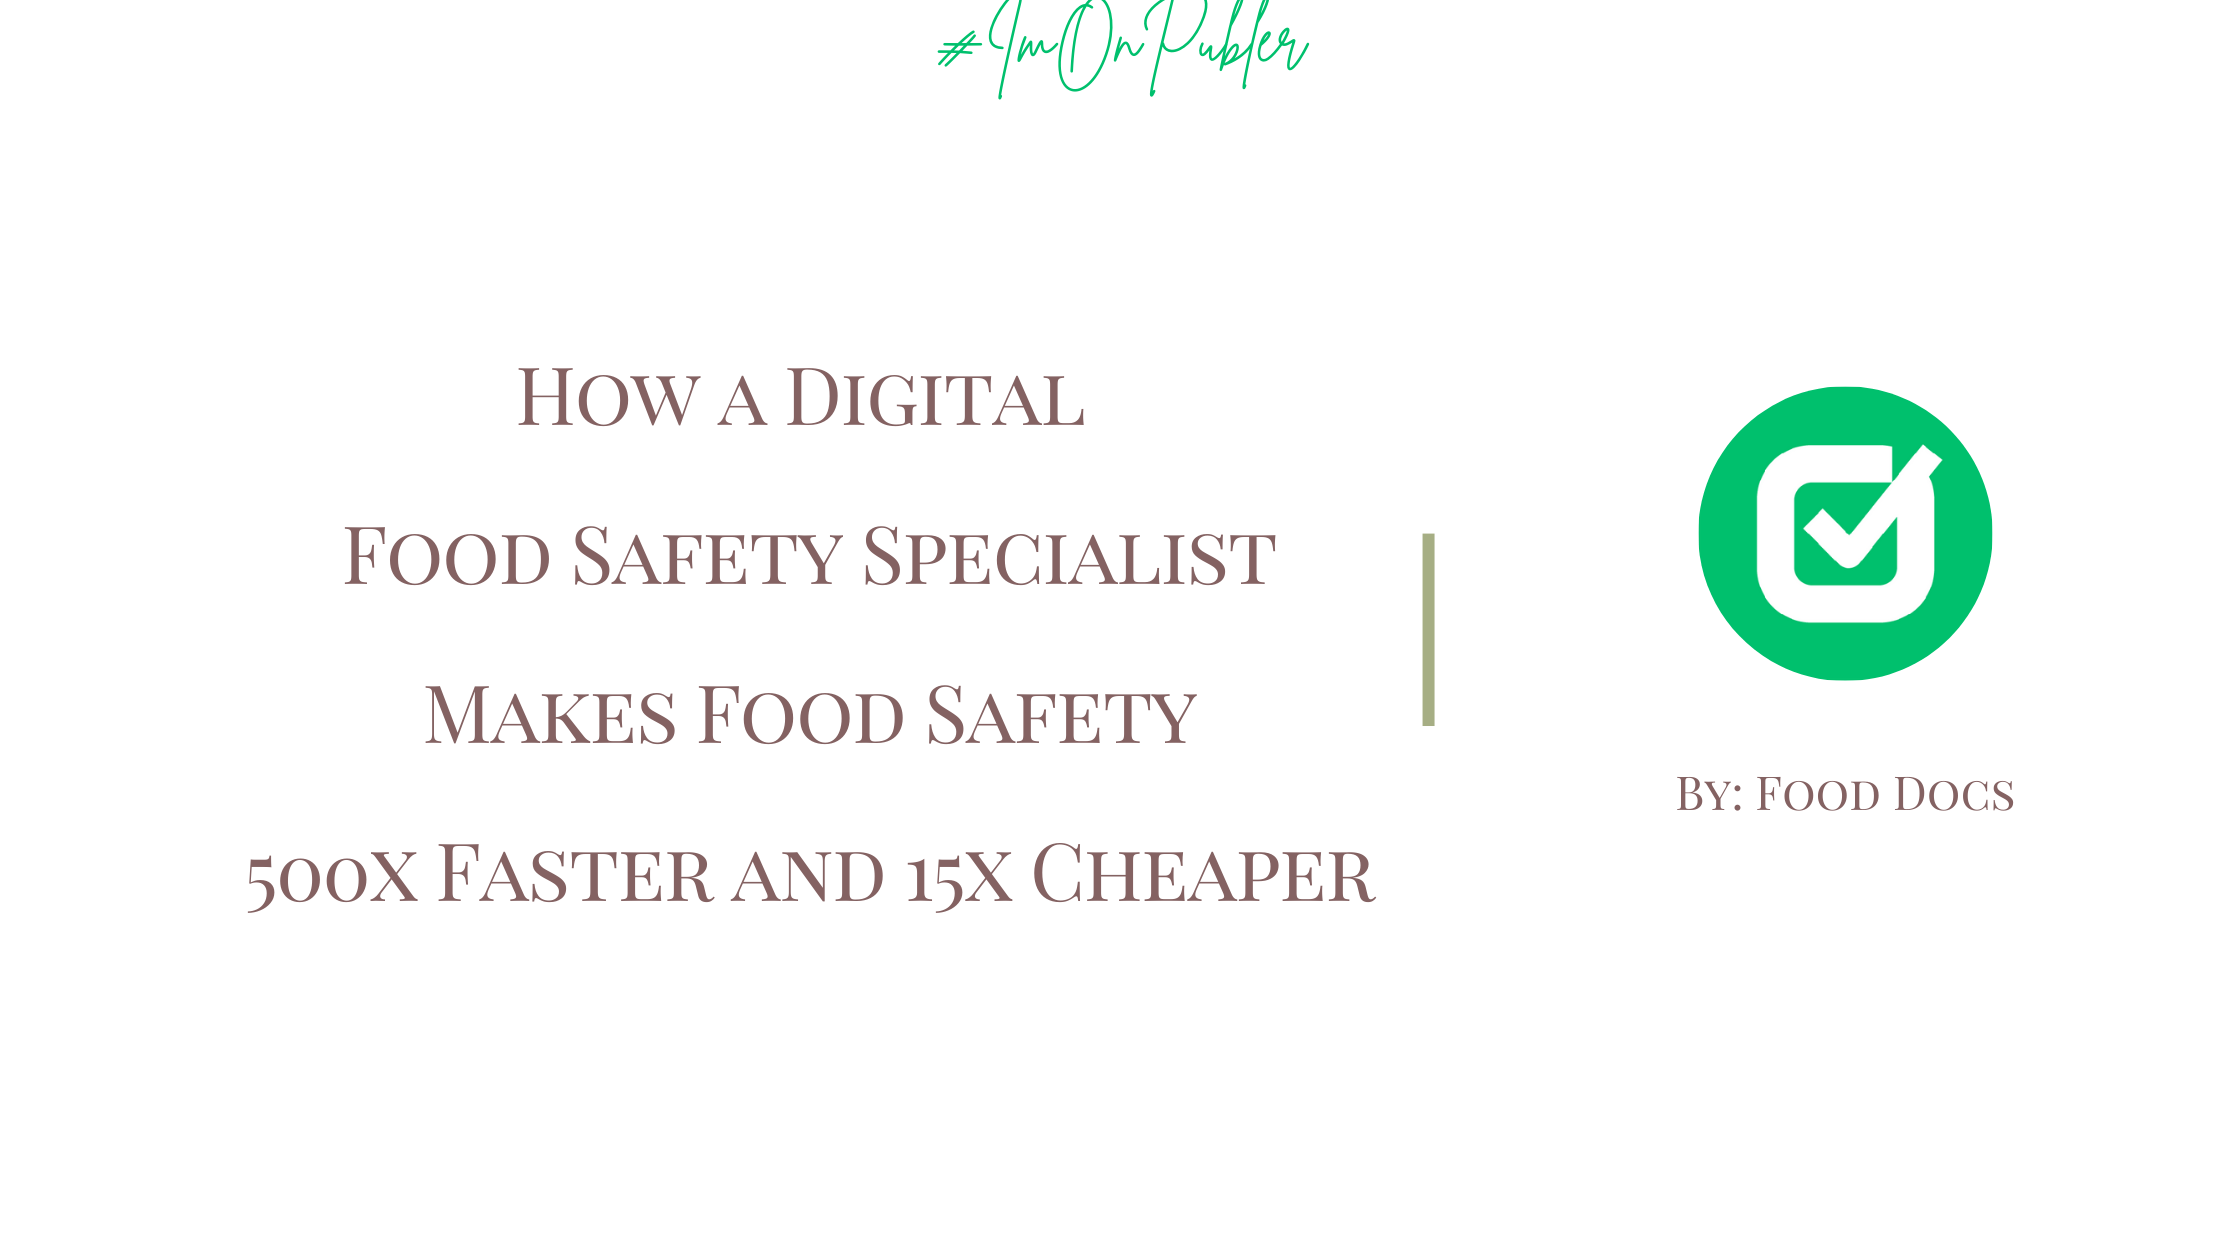 How a Digital Food Safety Specialist Makes Food Safety 500x Faster and 15x Cheaper Written by Jete Nelke Head of Marketing Fooddocs.com